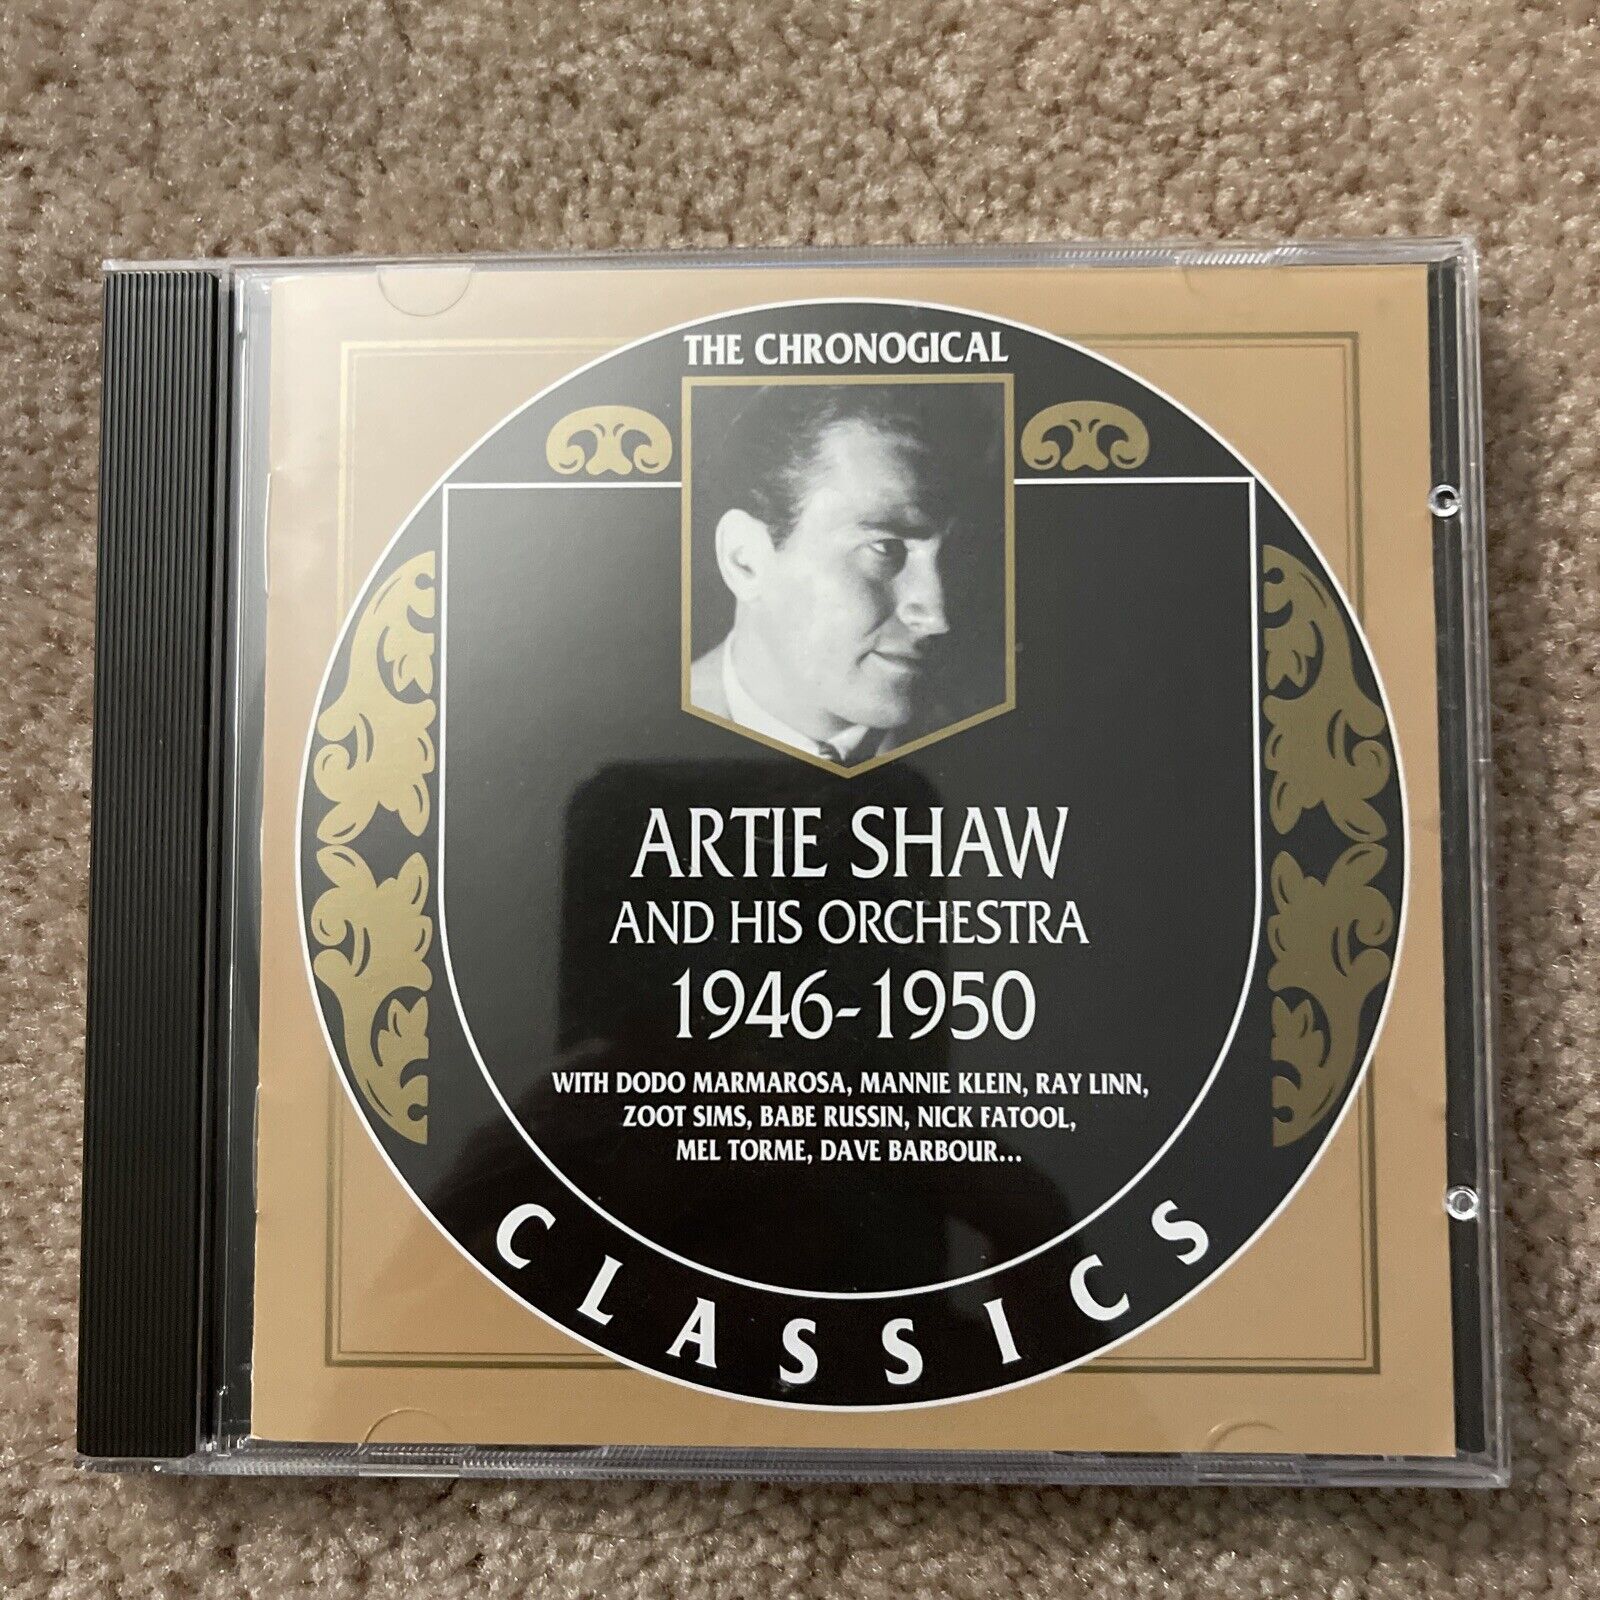 1946-1950 by Artie Shaw (CD, Jul-2004, Classic Collection)